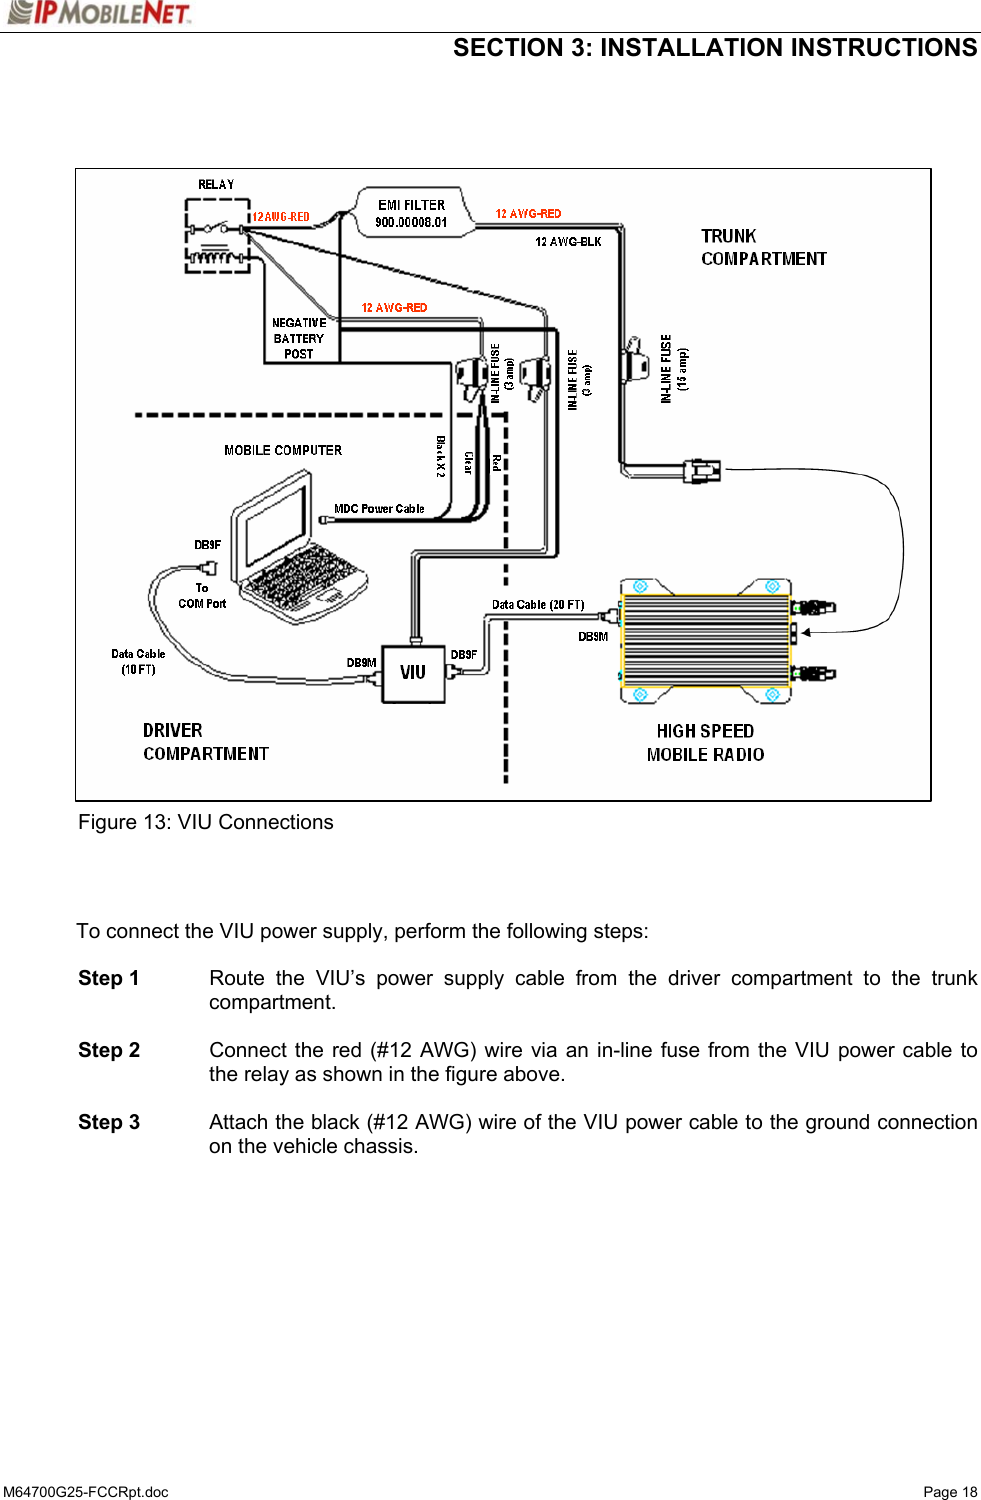  SECTION 3: INSTALLATION INSTRUCTIONS  M64700G25-FCCRpt.doc   Page 18                       Figure 13: VIU Connections    To connect the VIU power supply, perform the following steps:   Step 1  Route the VIU’s power supply cable from the driver compartment to the trunk compartment.   Step 2  Connect the red (#12 AWG) wire via an in-line fuse from the VIU power cable to the relay as shown in the figure above.   Step 3  Attach the black (#12 AWG) wire of the VIU power cable to the ground connection on the vehicle chassis.   